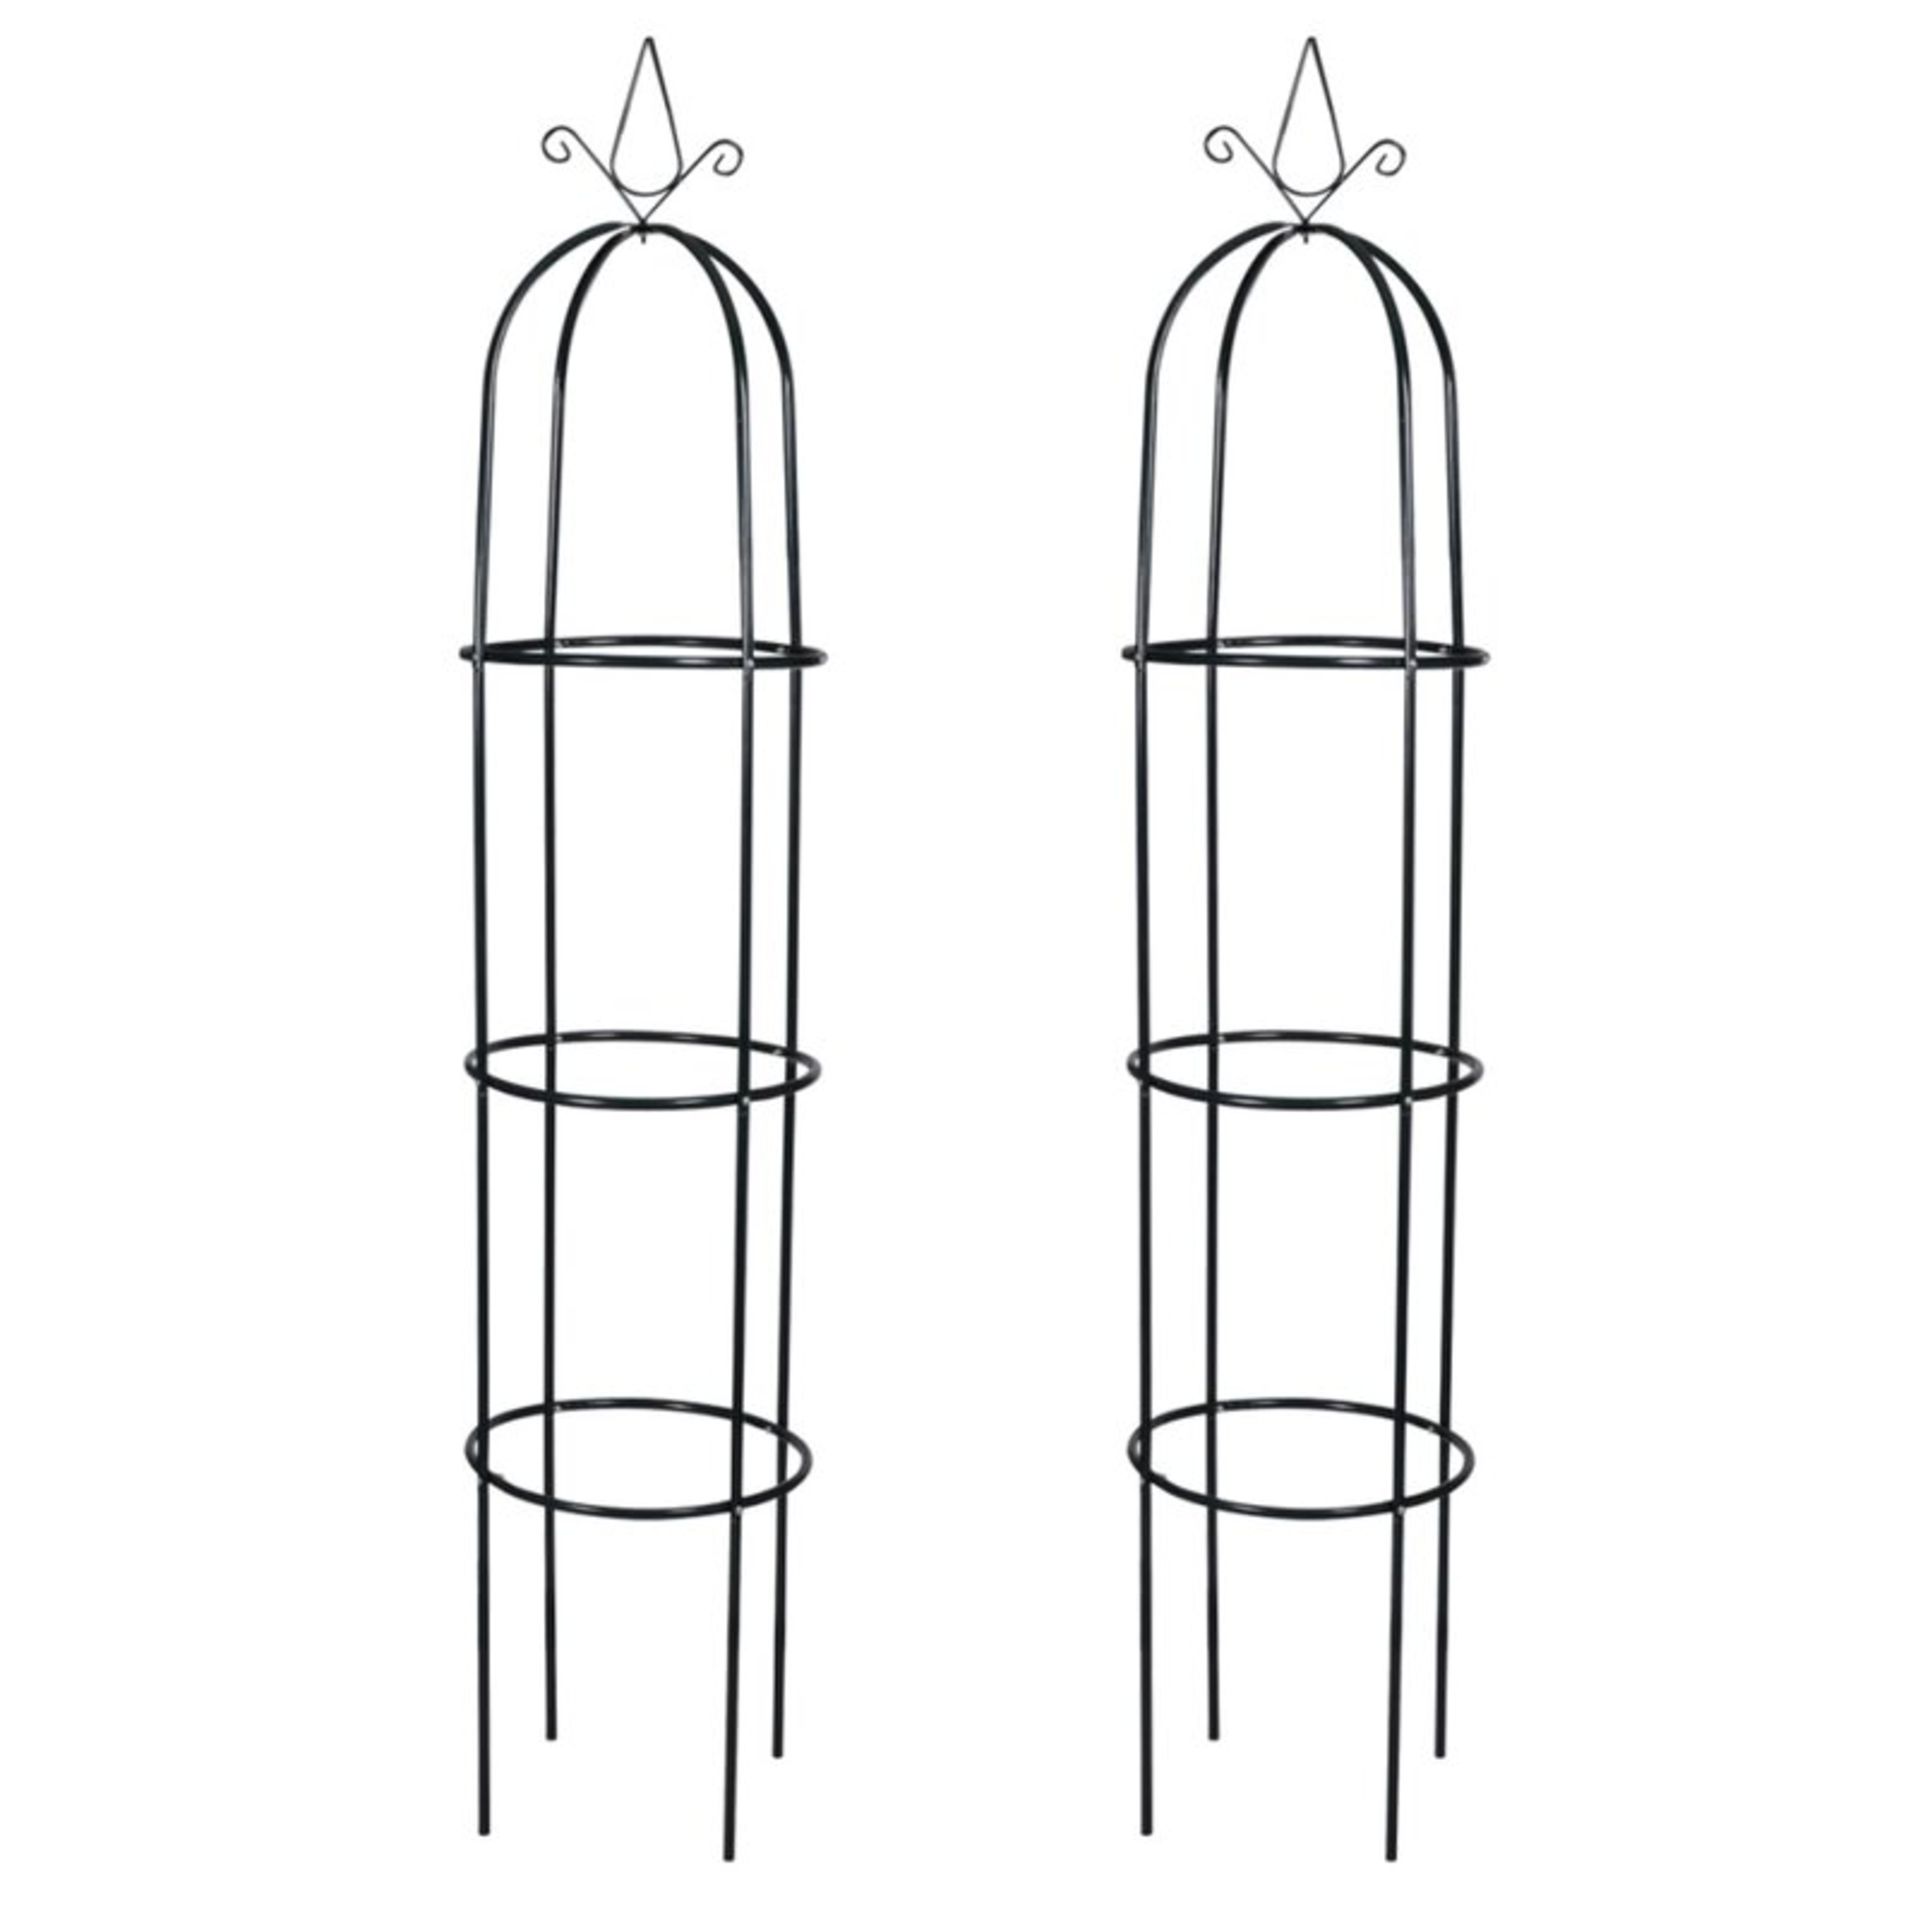 Rose Arches (Set of 2) - RRP £33.99